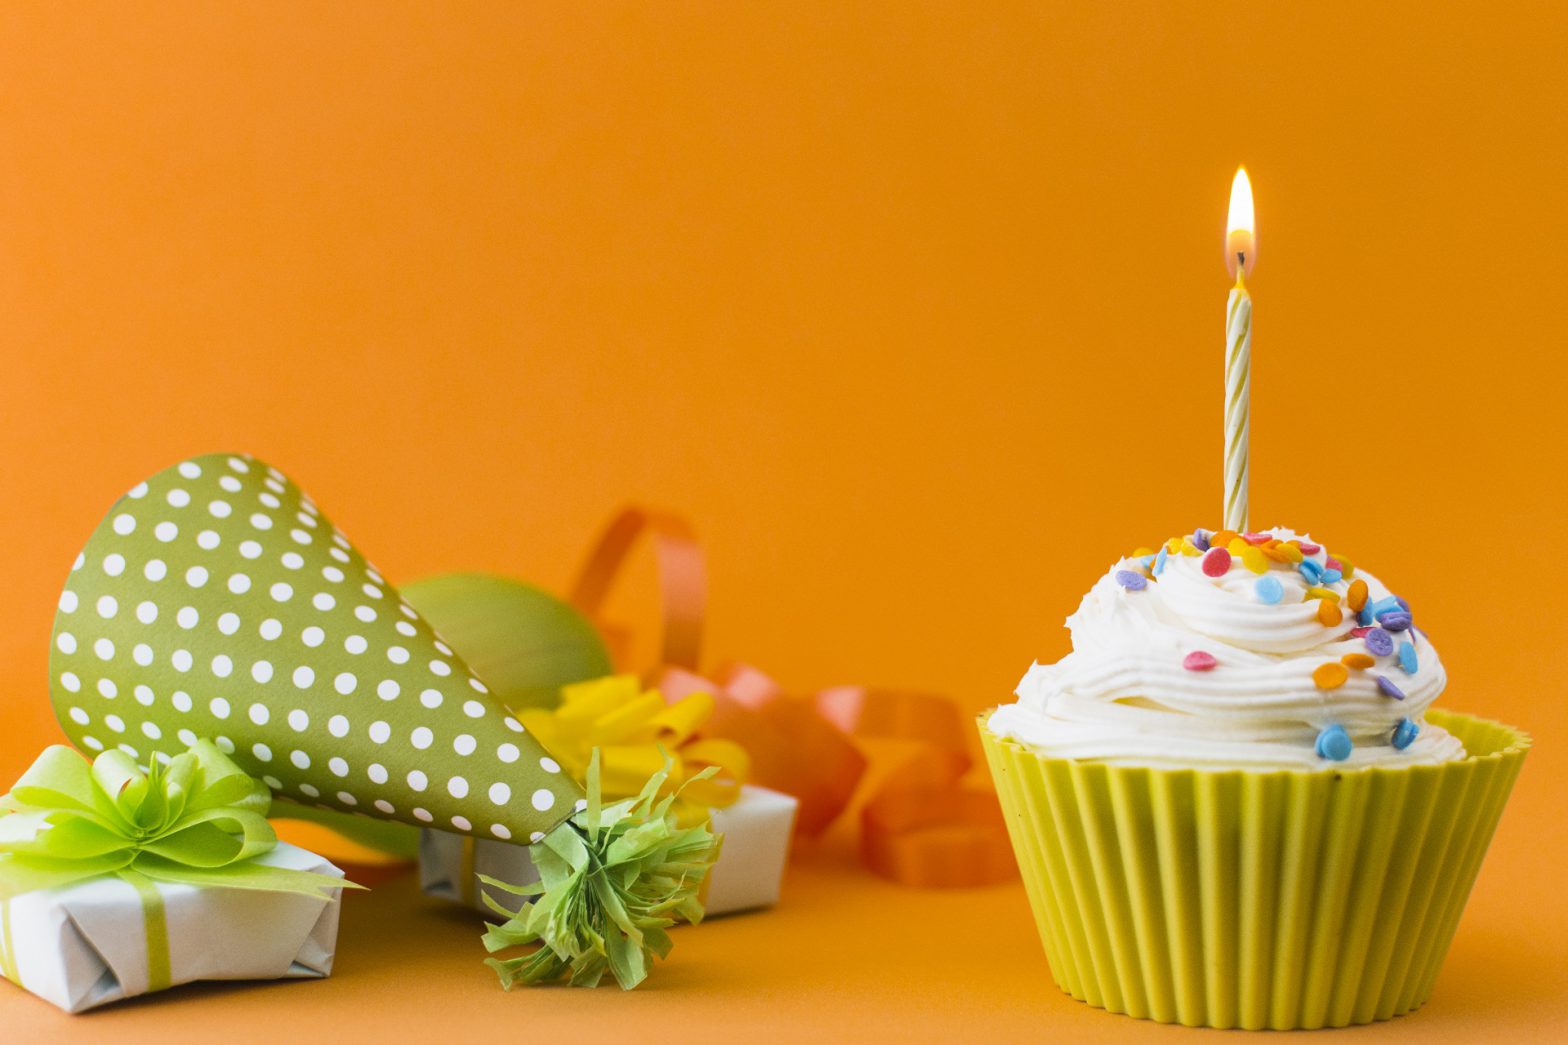 Make special, personalized birthday videos for that extra special day